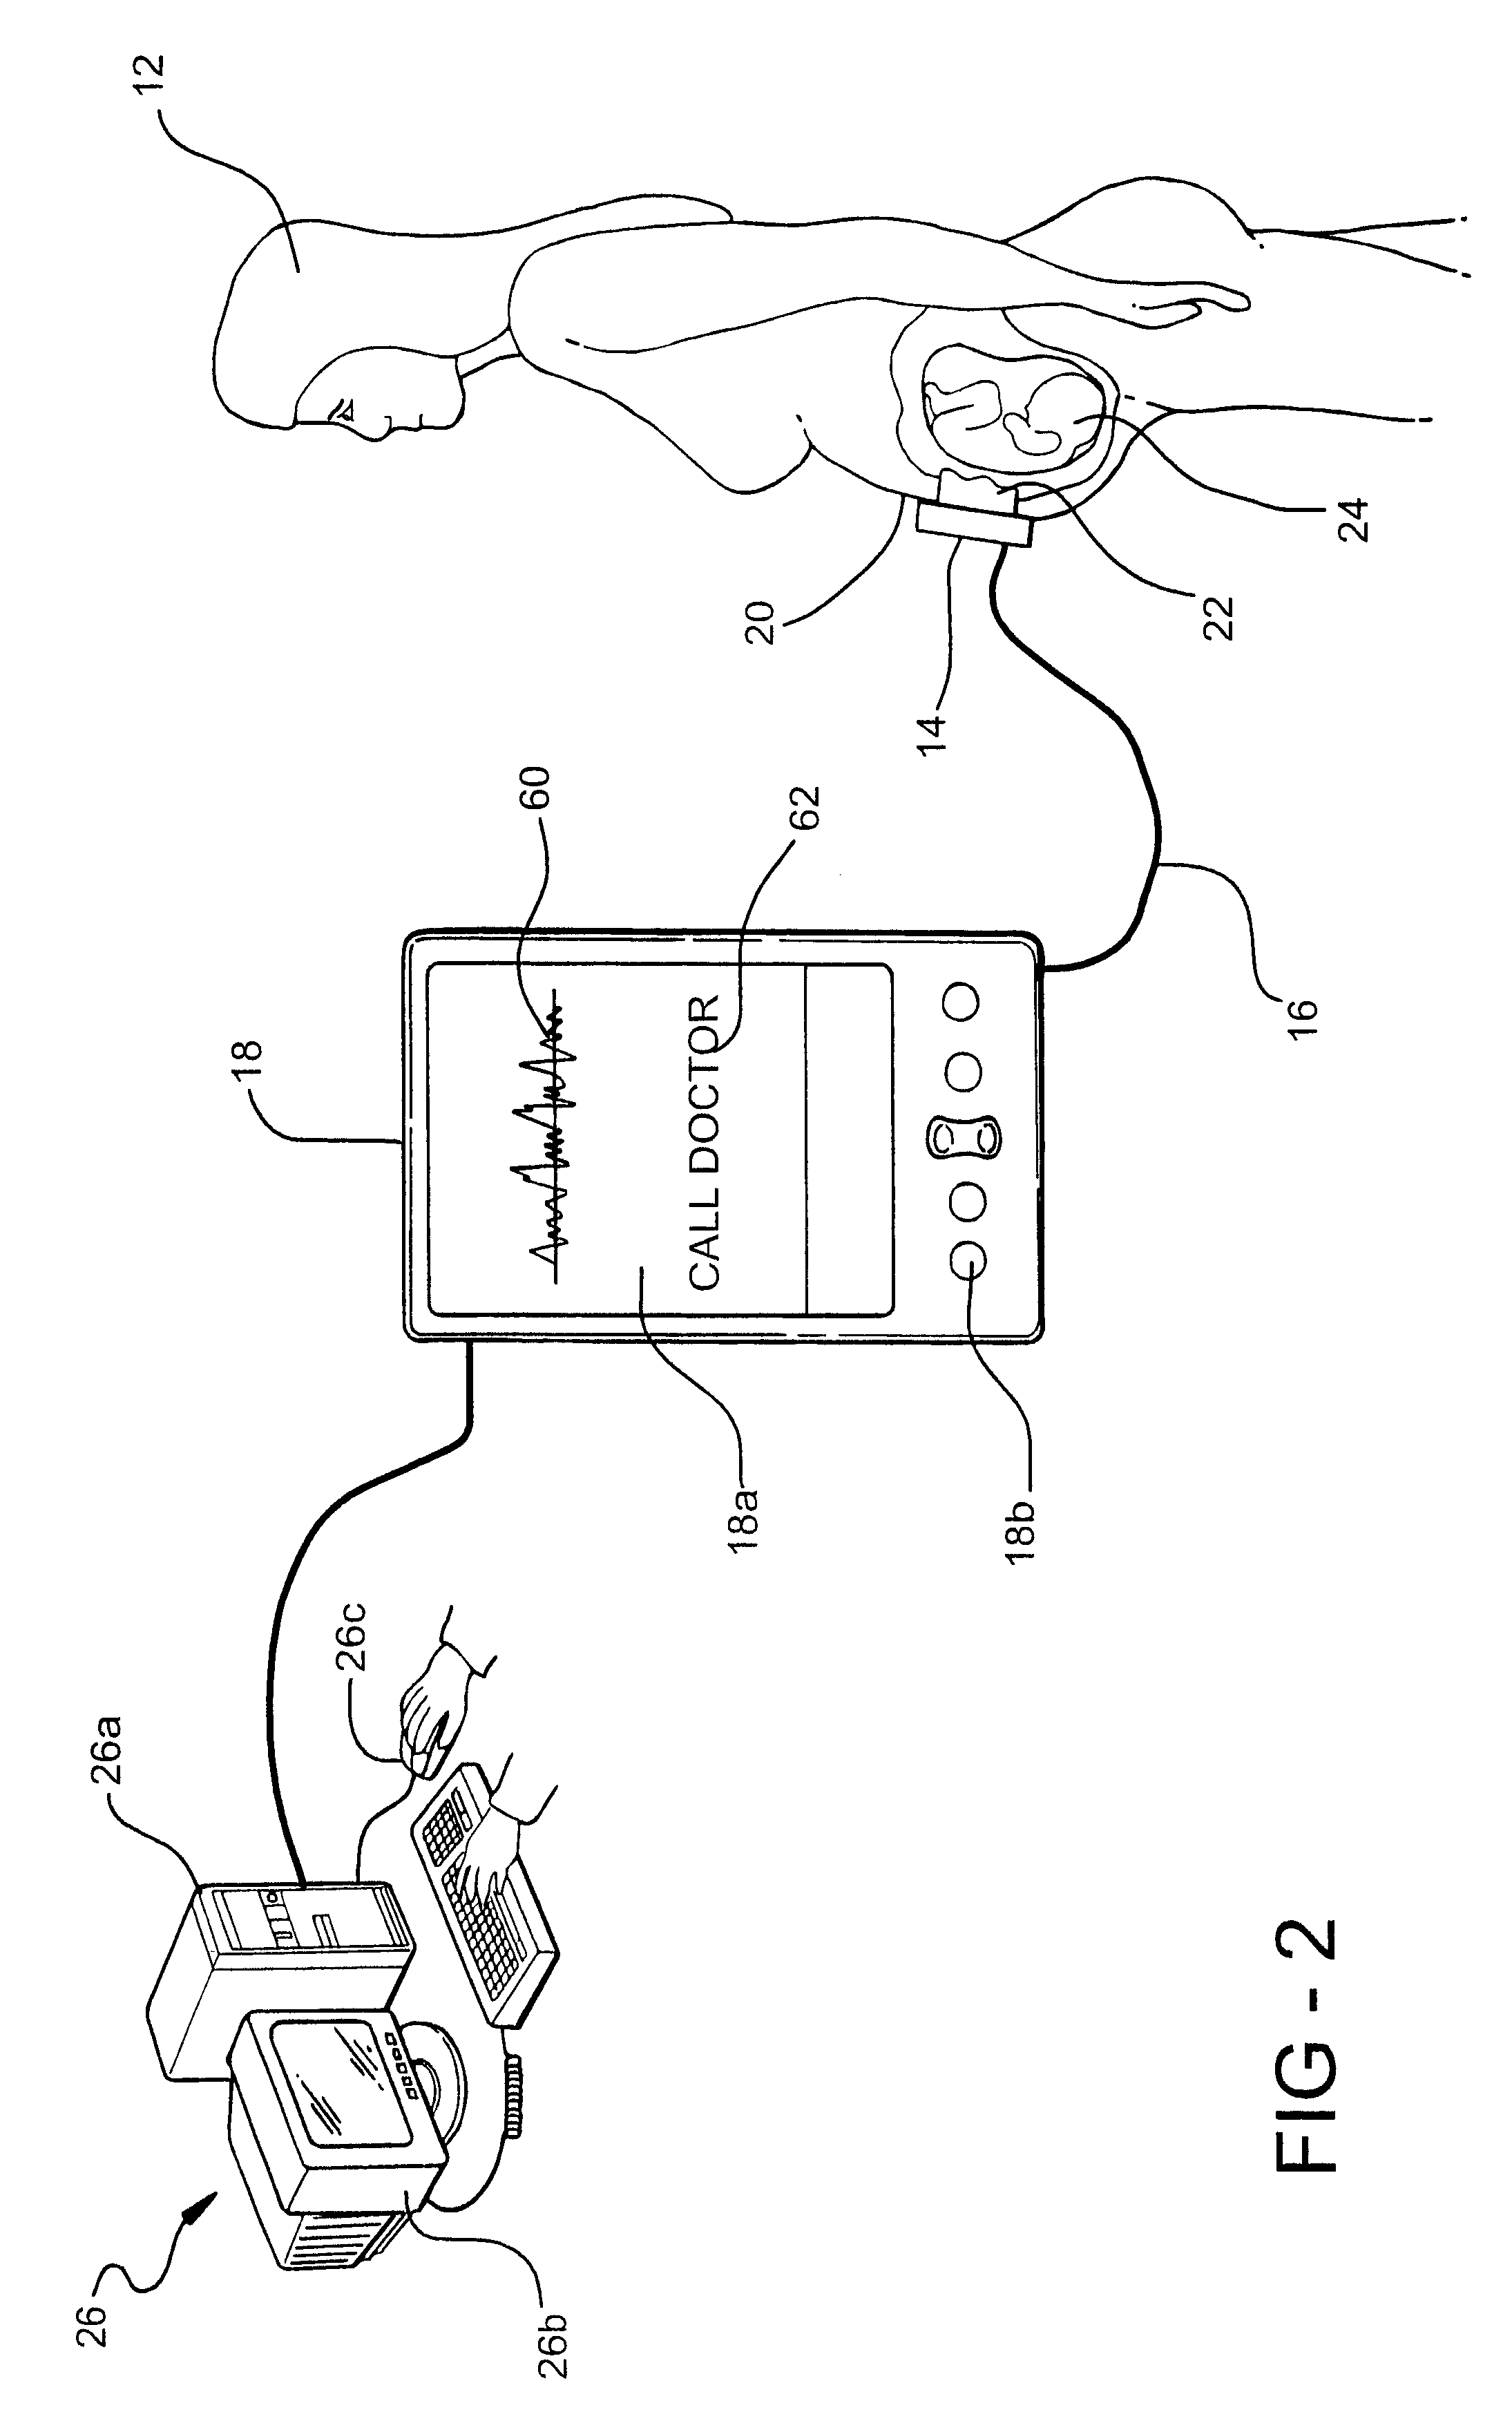 System and method for remote pregnancy monitoring